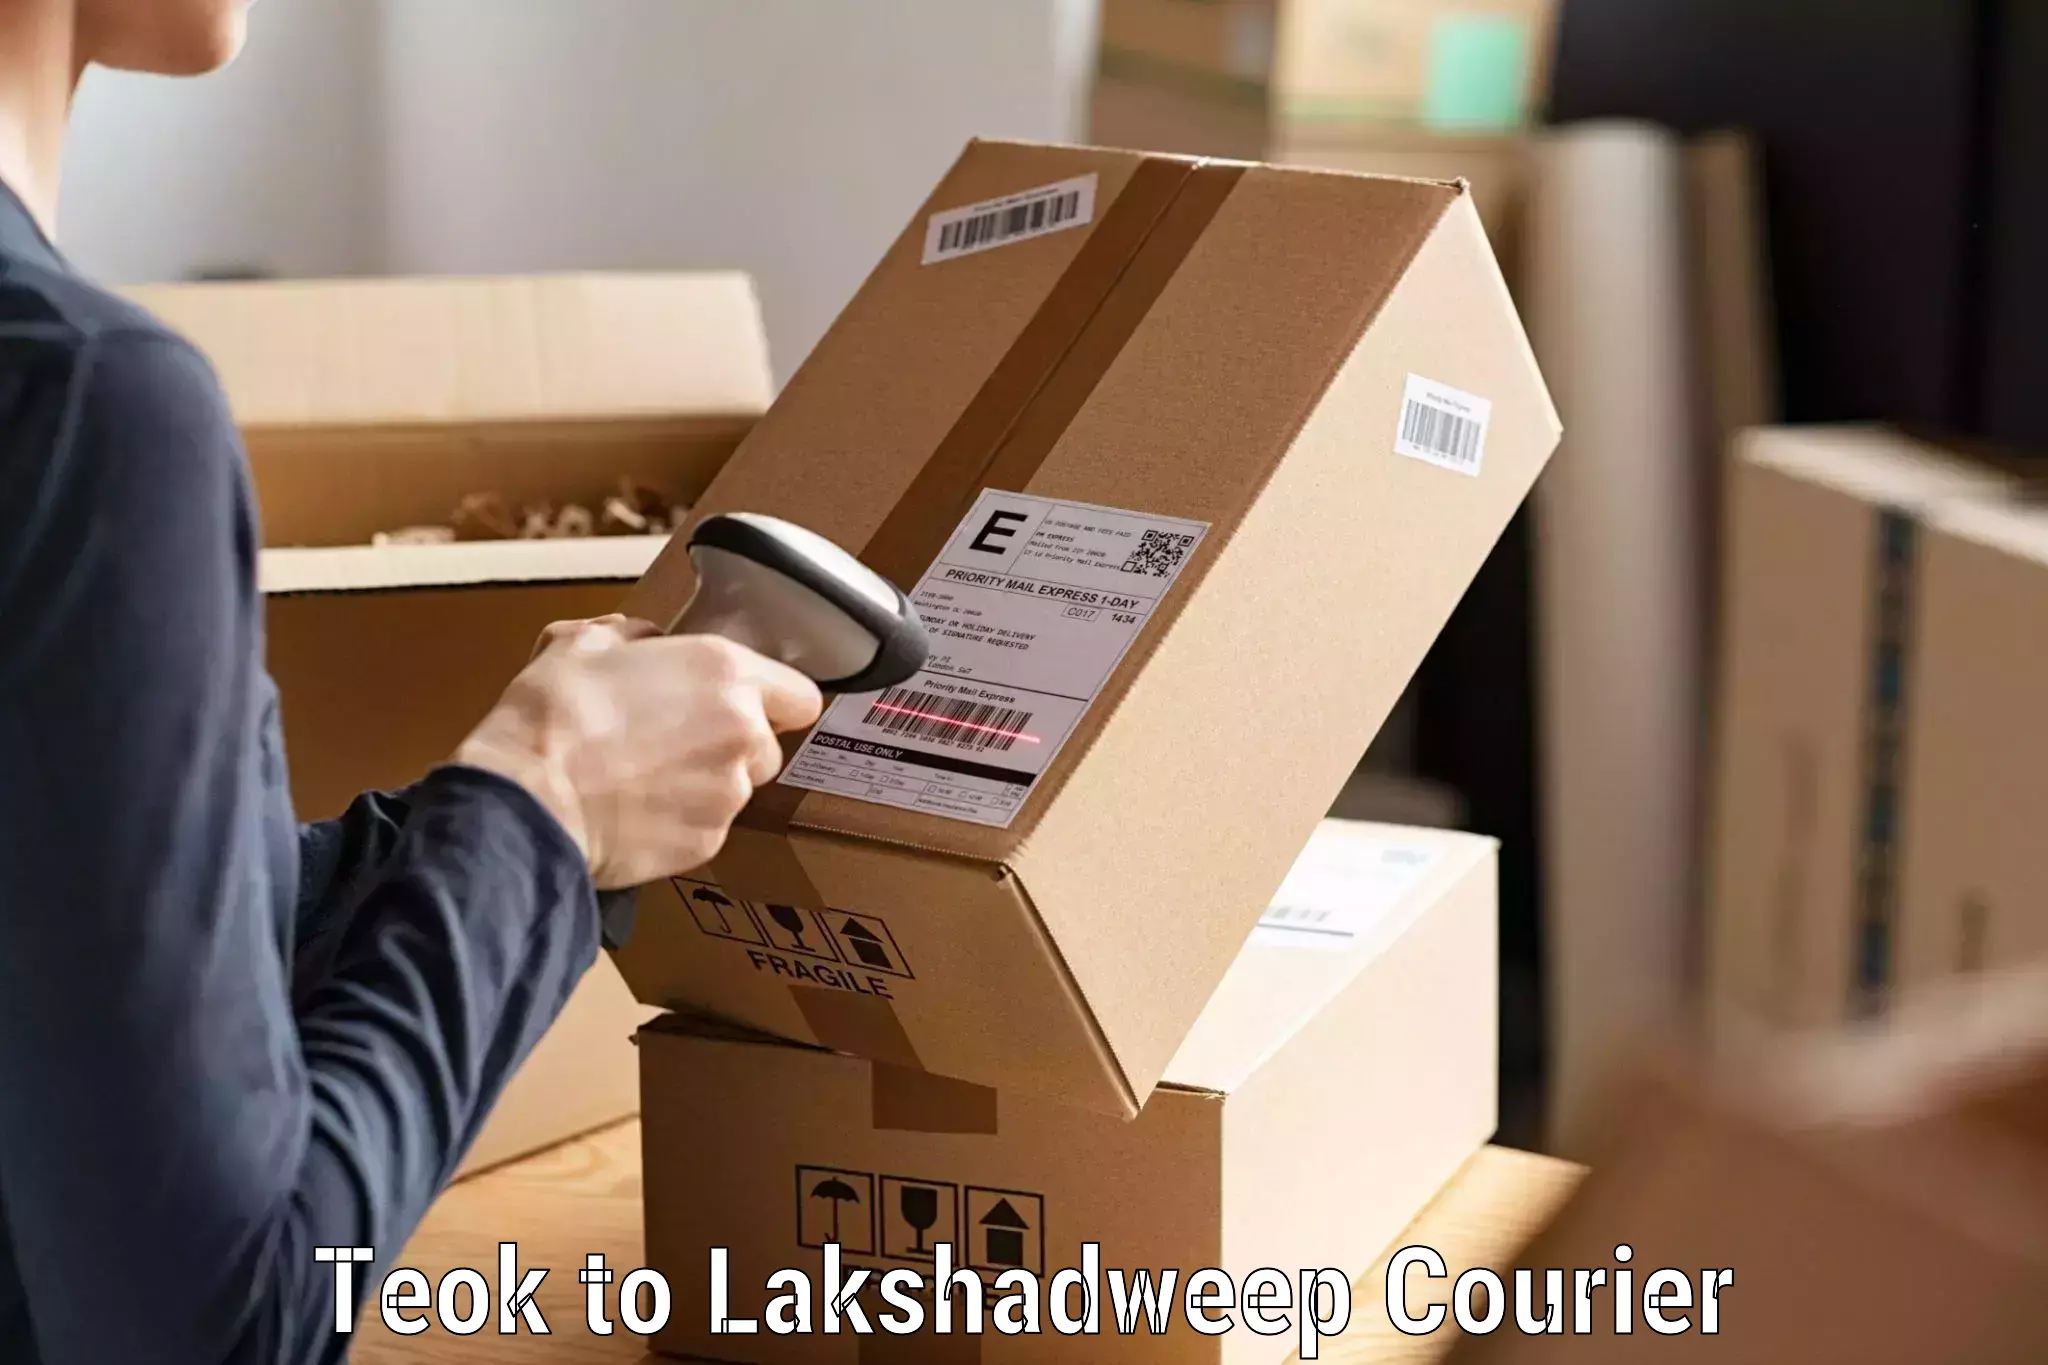 Corporate courier solutions Teok to Lakshadweep